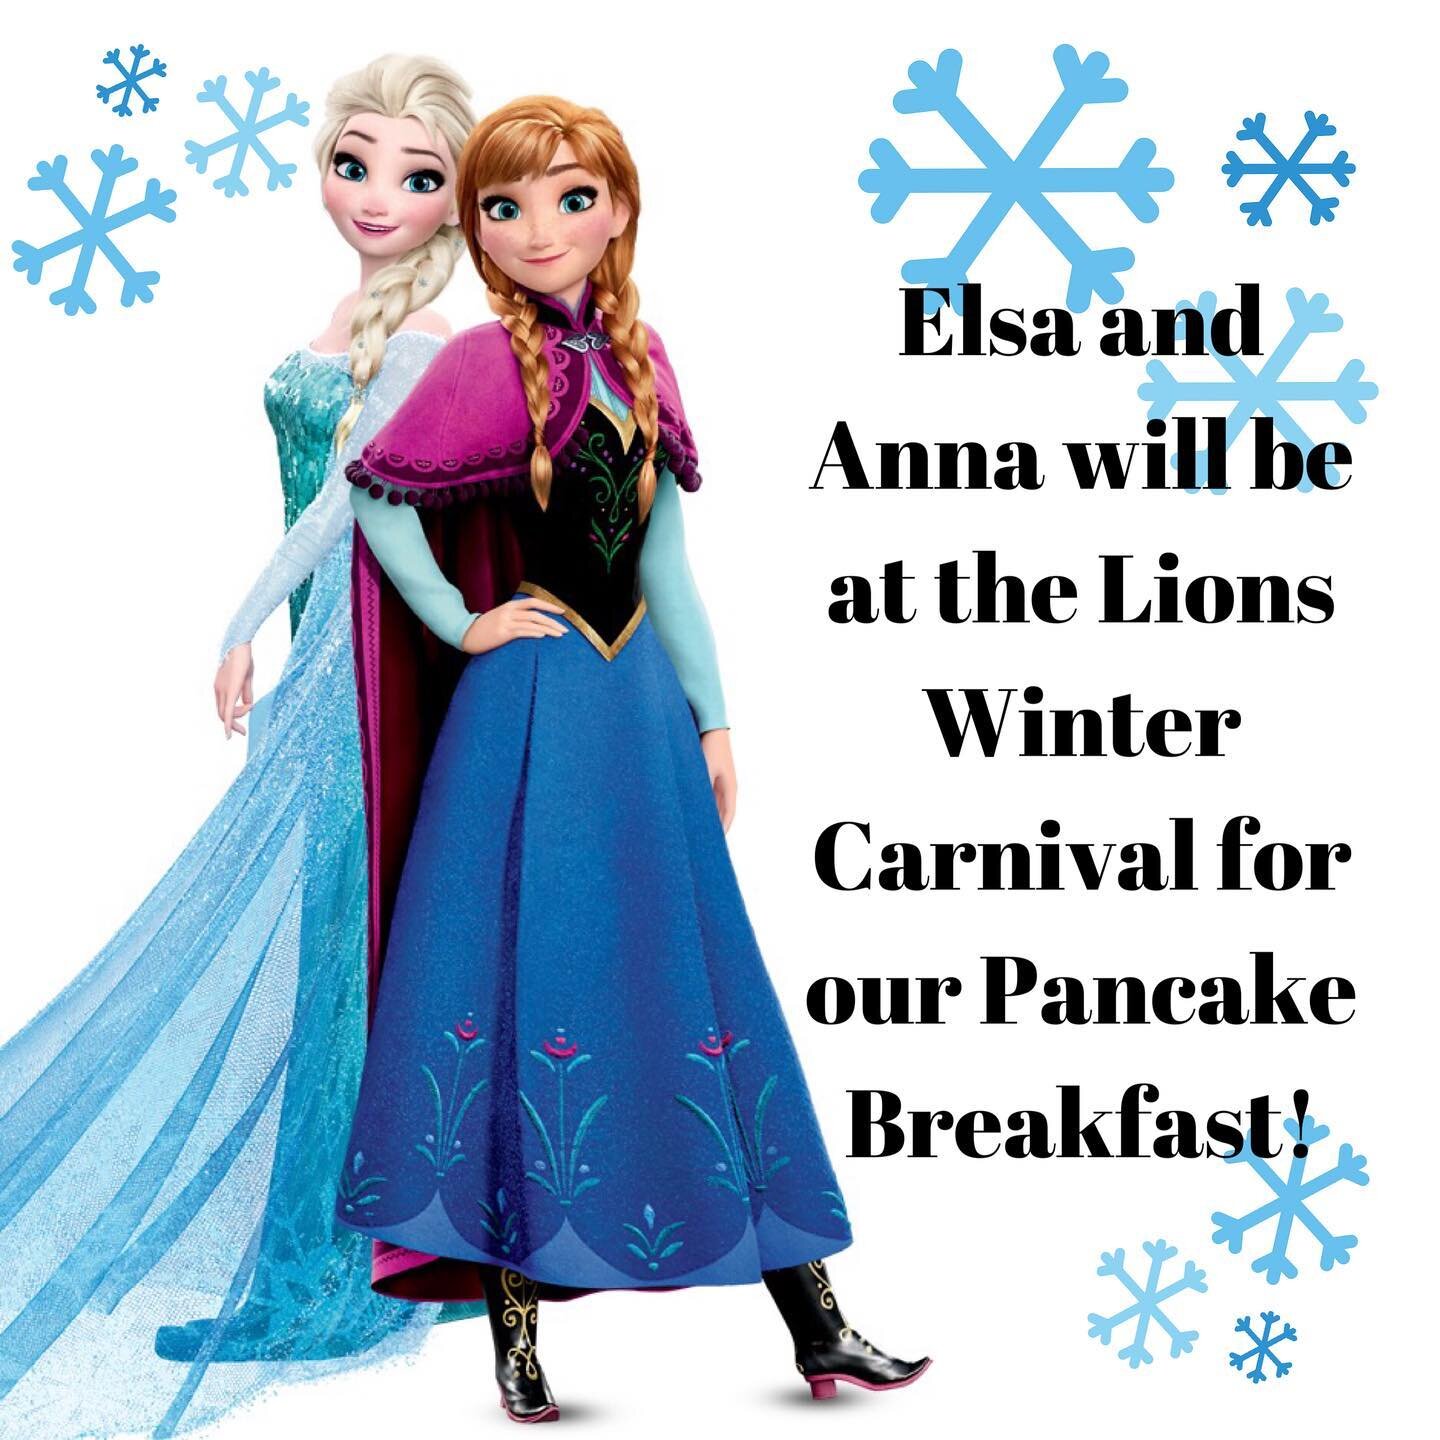 Hey there everyone! The Beaverton Lions are happy to announce that Elsa and Anna will be at our Annual Winter Carnival! You can come and see them during our Pancake Breakfast located inside the Beacan Church Youth Centre from 8:00-11:00 am on Februar